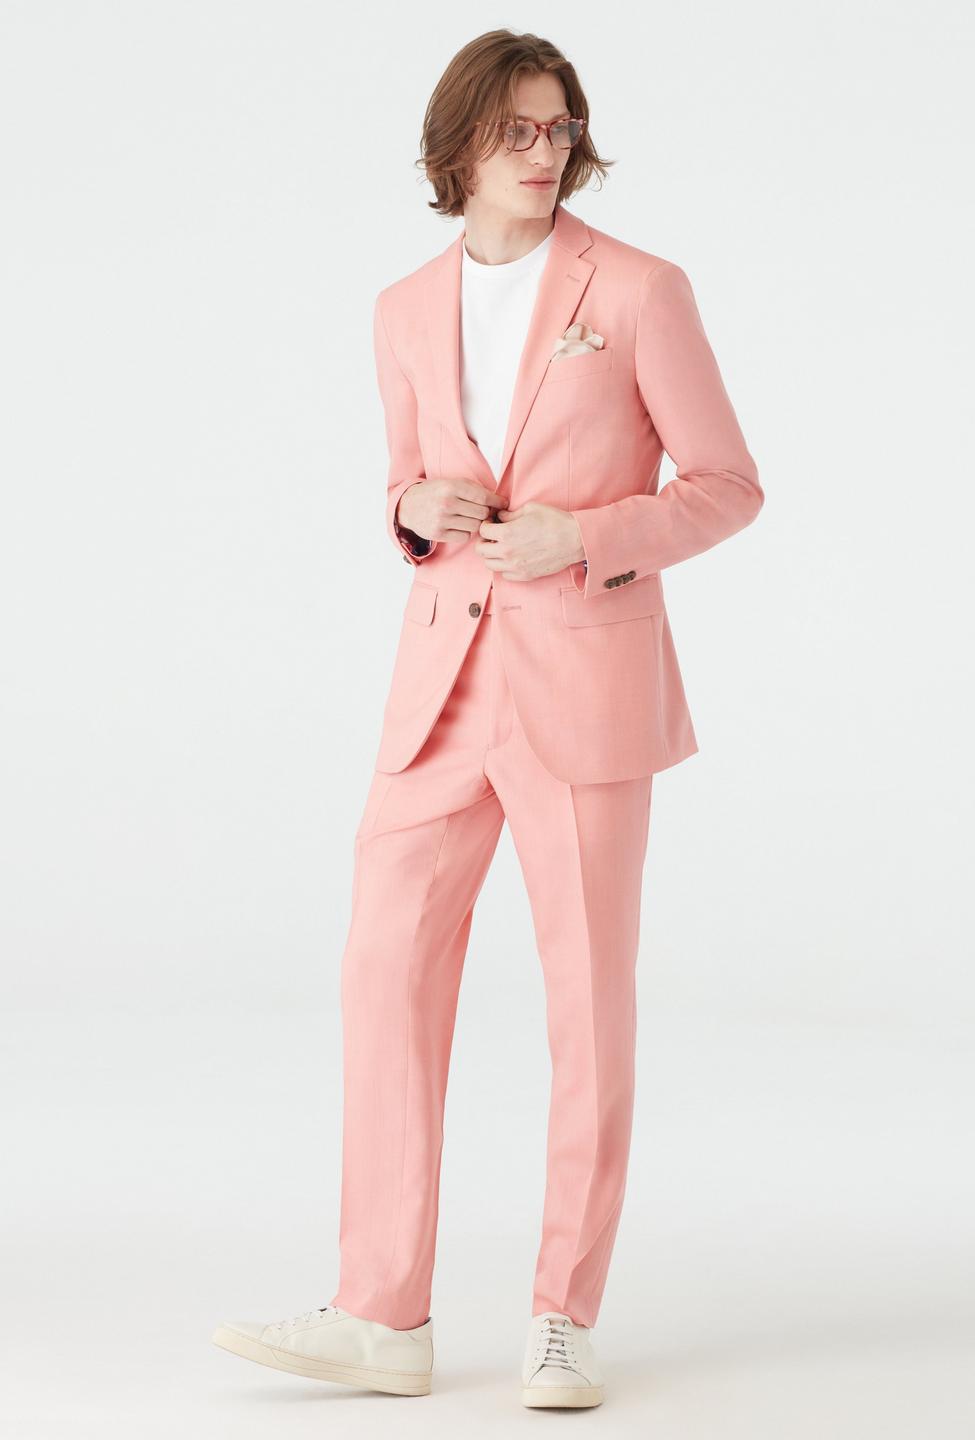 Pink blazer - Solid Design from Seasonal Indochino Collection